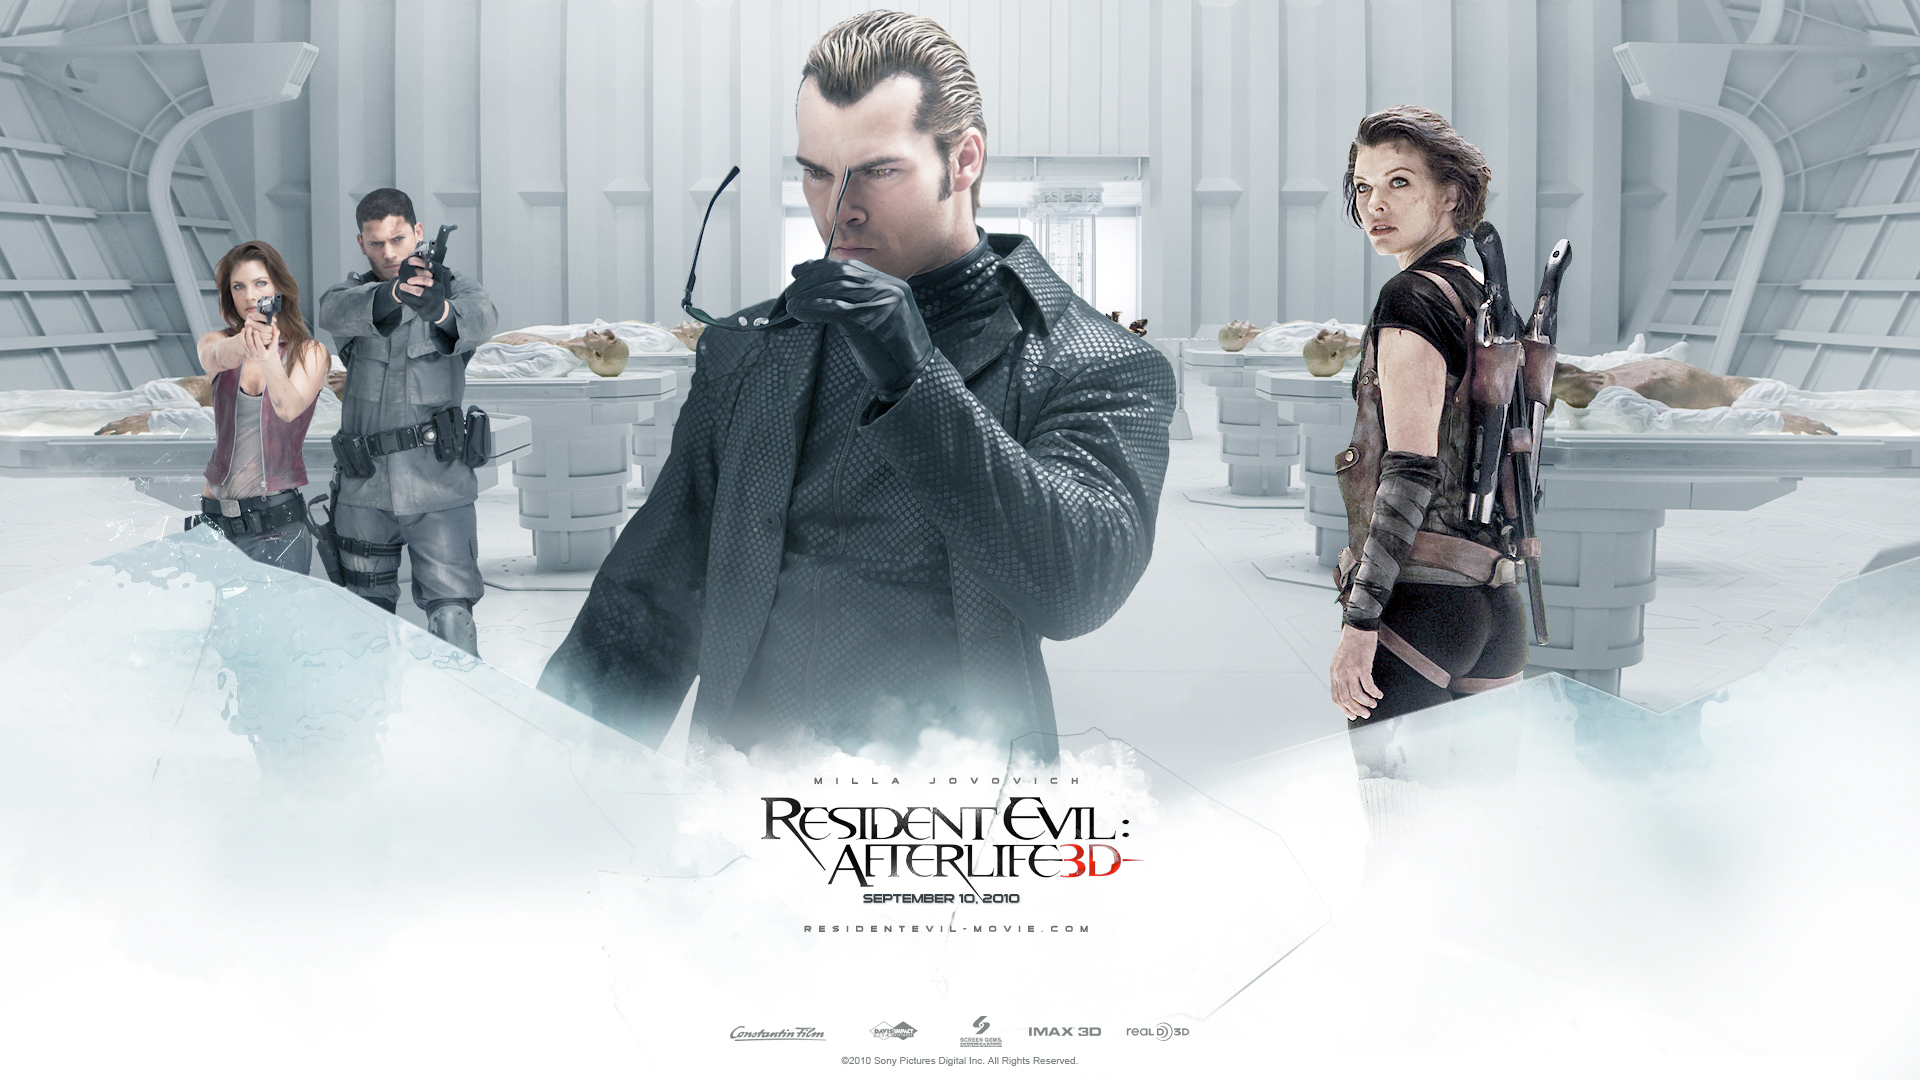 Movie poster for Resident Evil: Afterlife featuring Milla Jovovich, Ali Larter and Wentworth Miller.